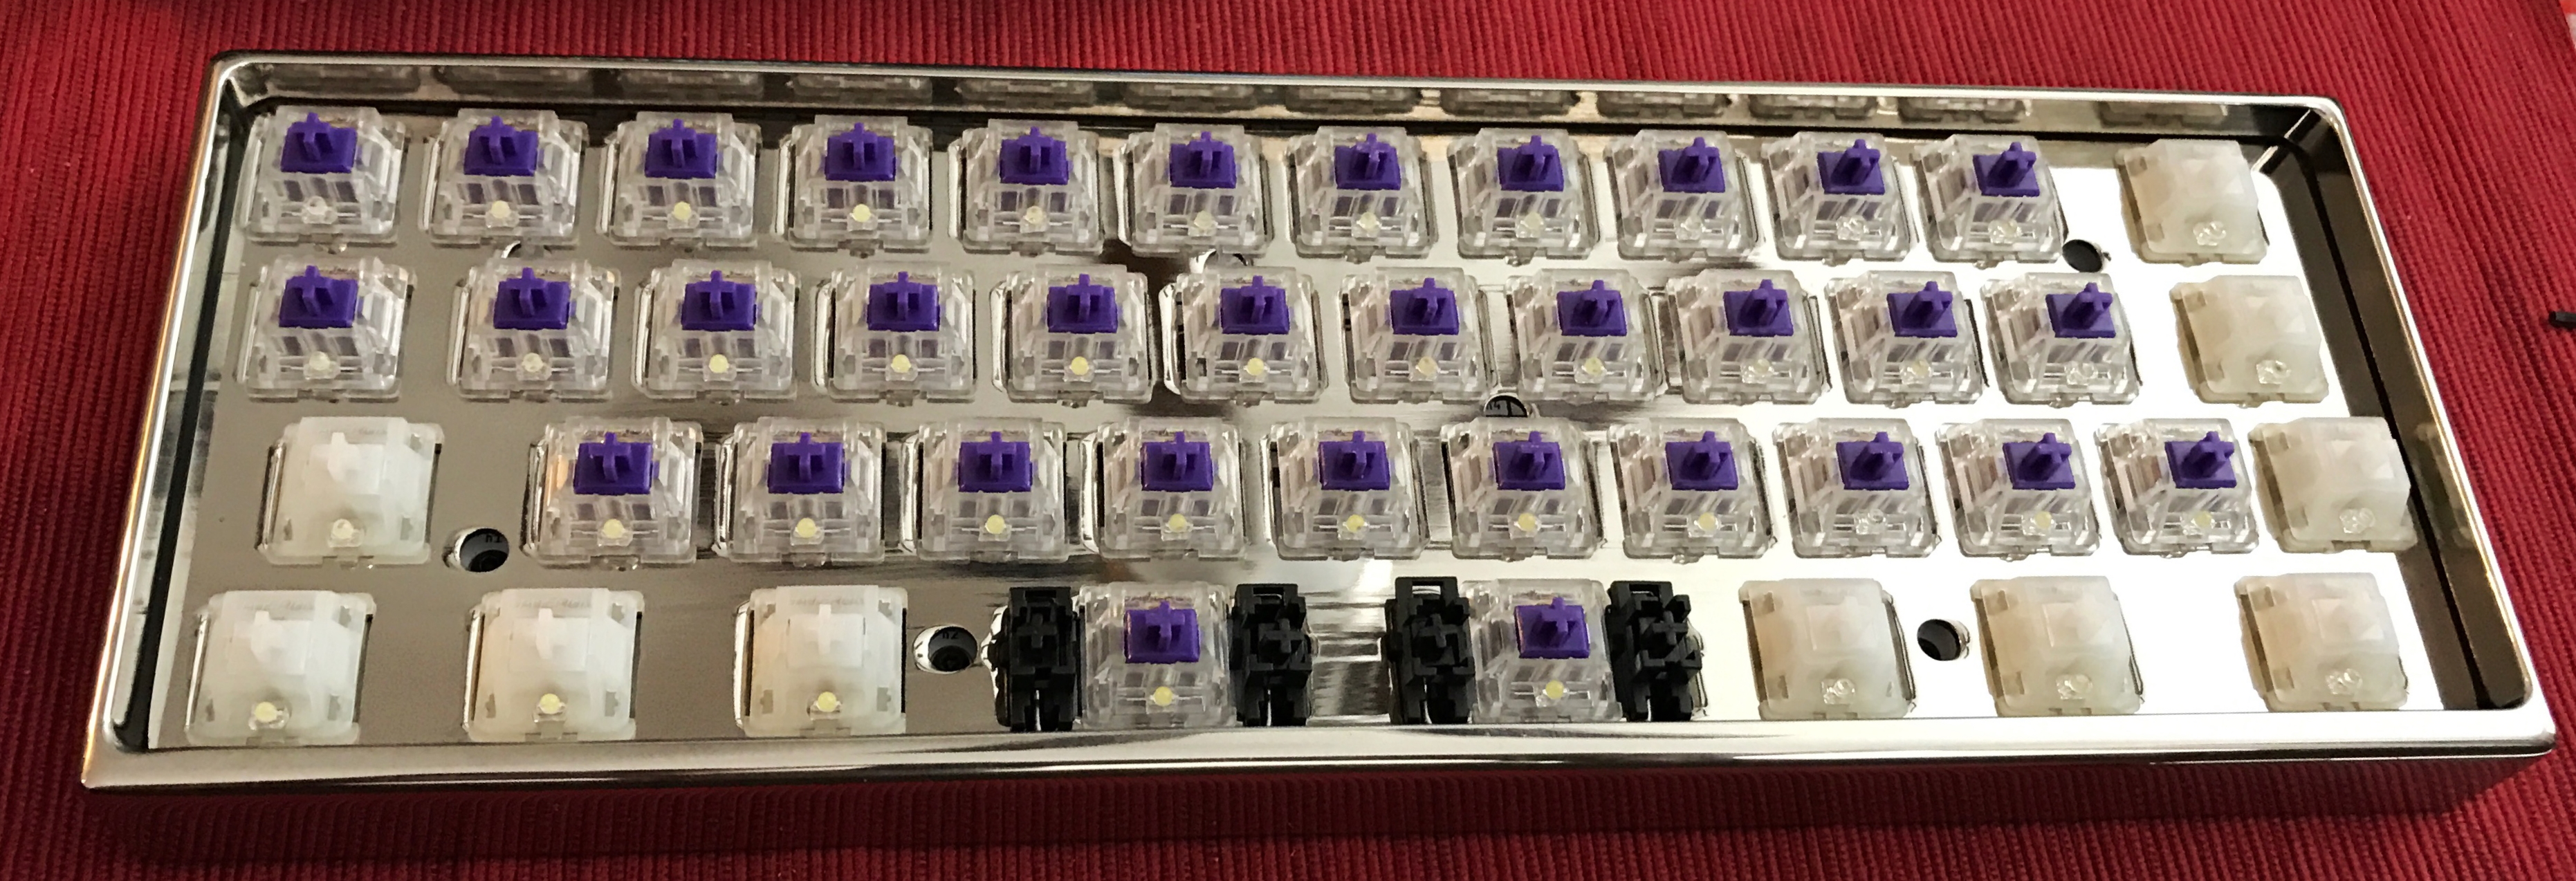 Assembled nickel MiniVan R3 without keycaps